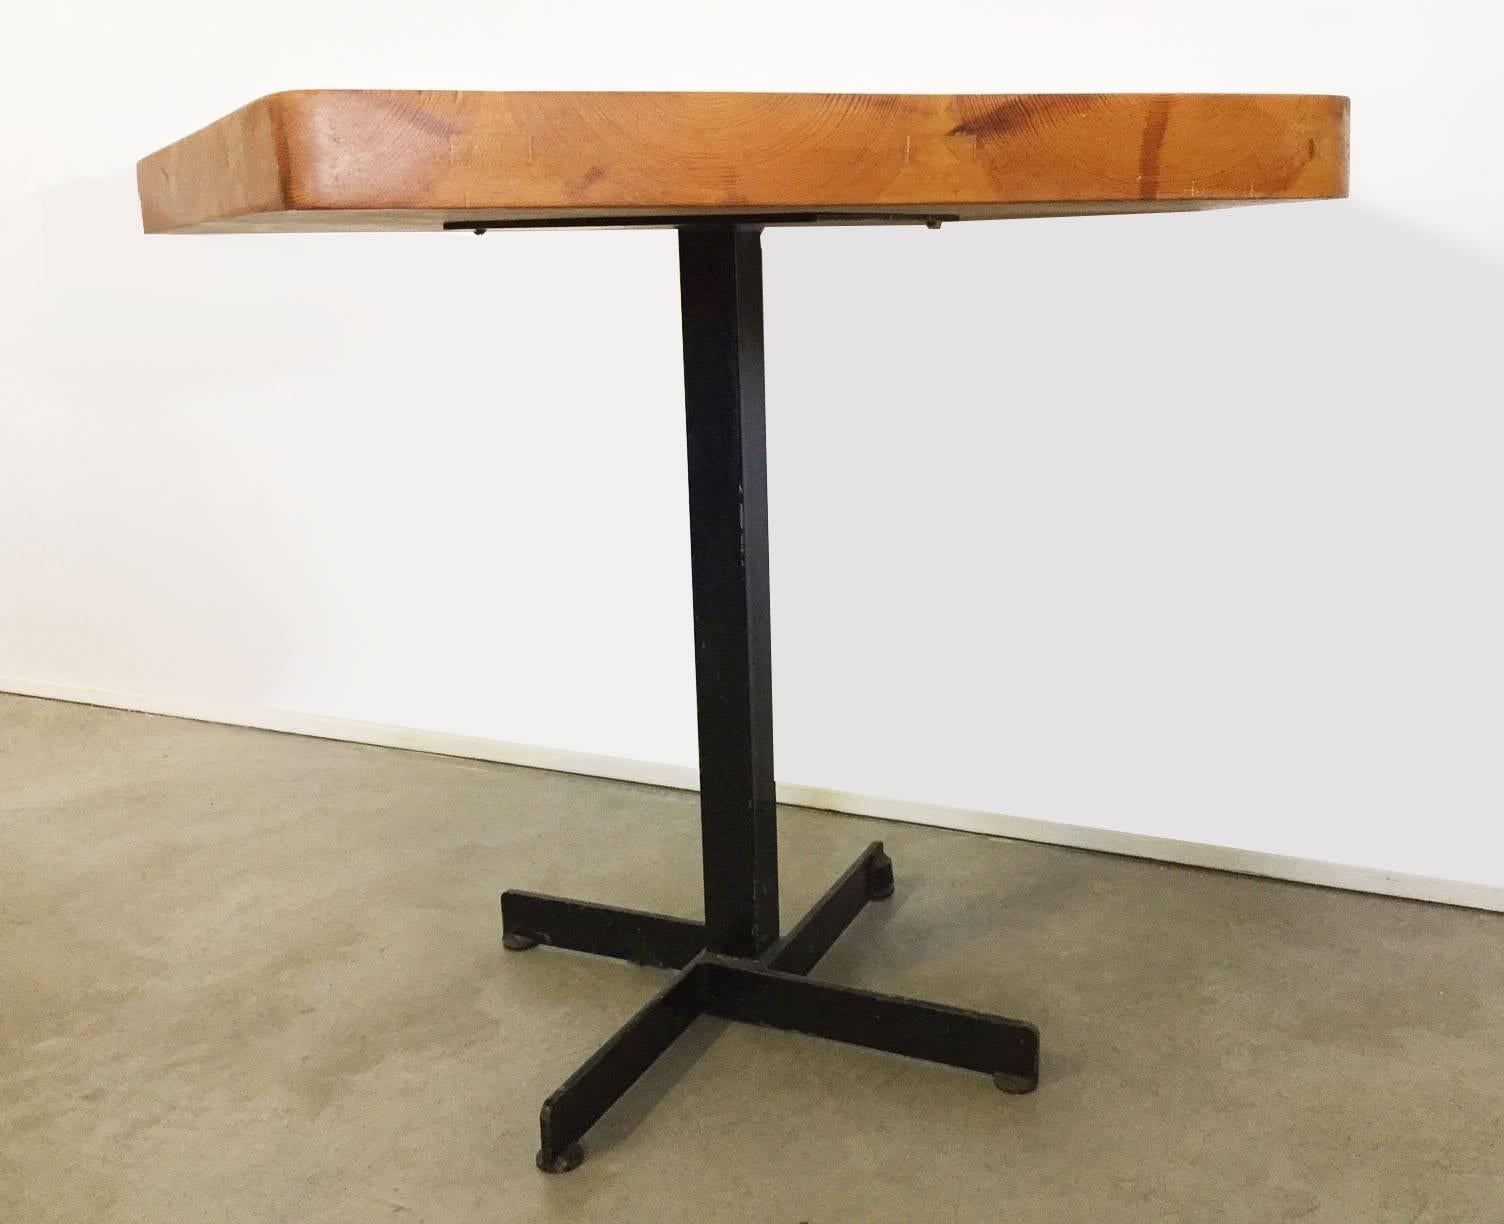 Beautiful pentagonal table designed by Charlotte Perriand for Les Arcs Ski Resort in 1960, very thick top in pine wood, black lacquered iron leg and feet.
Available also four chairs with straw seat and three doors sideboard pine wood and white